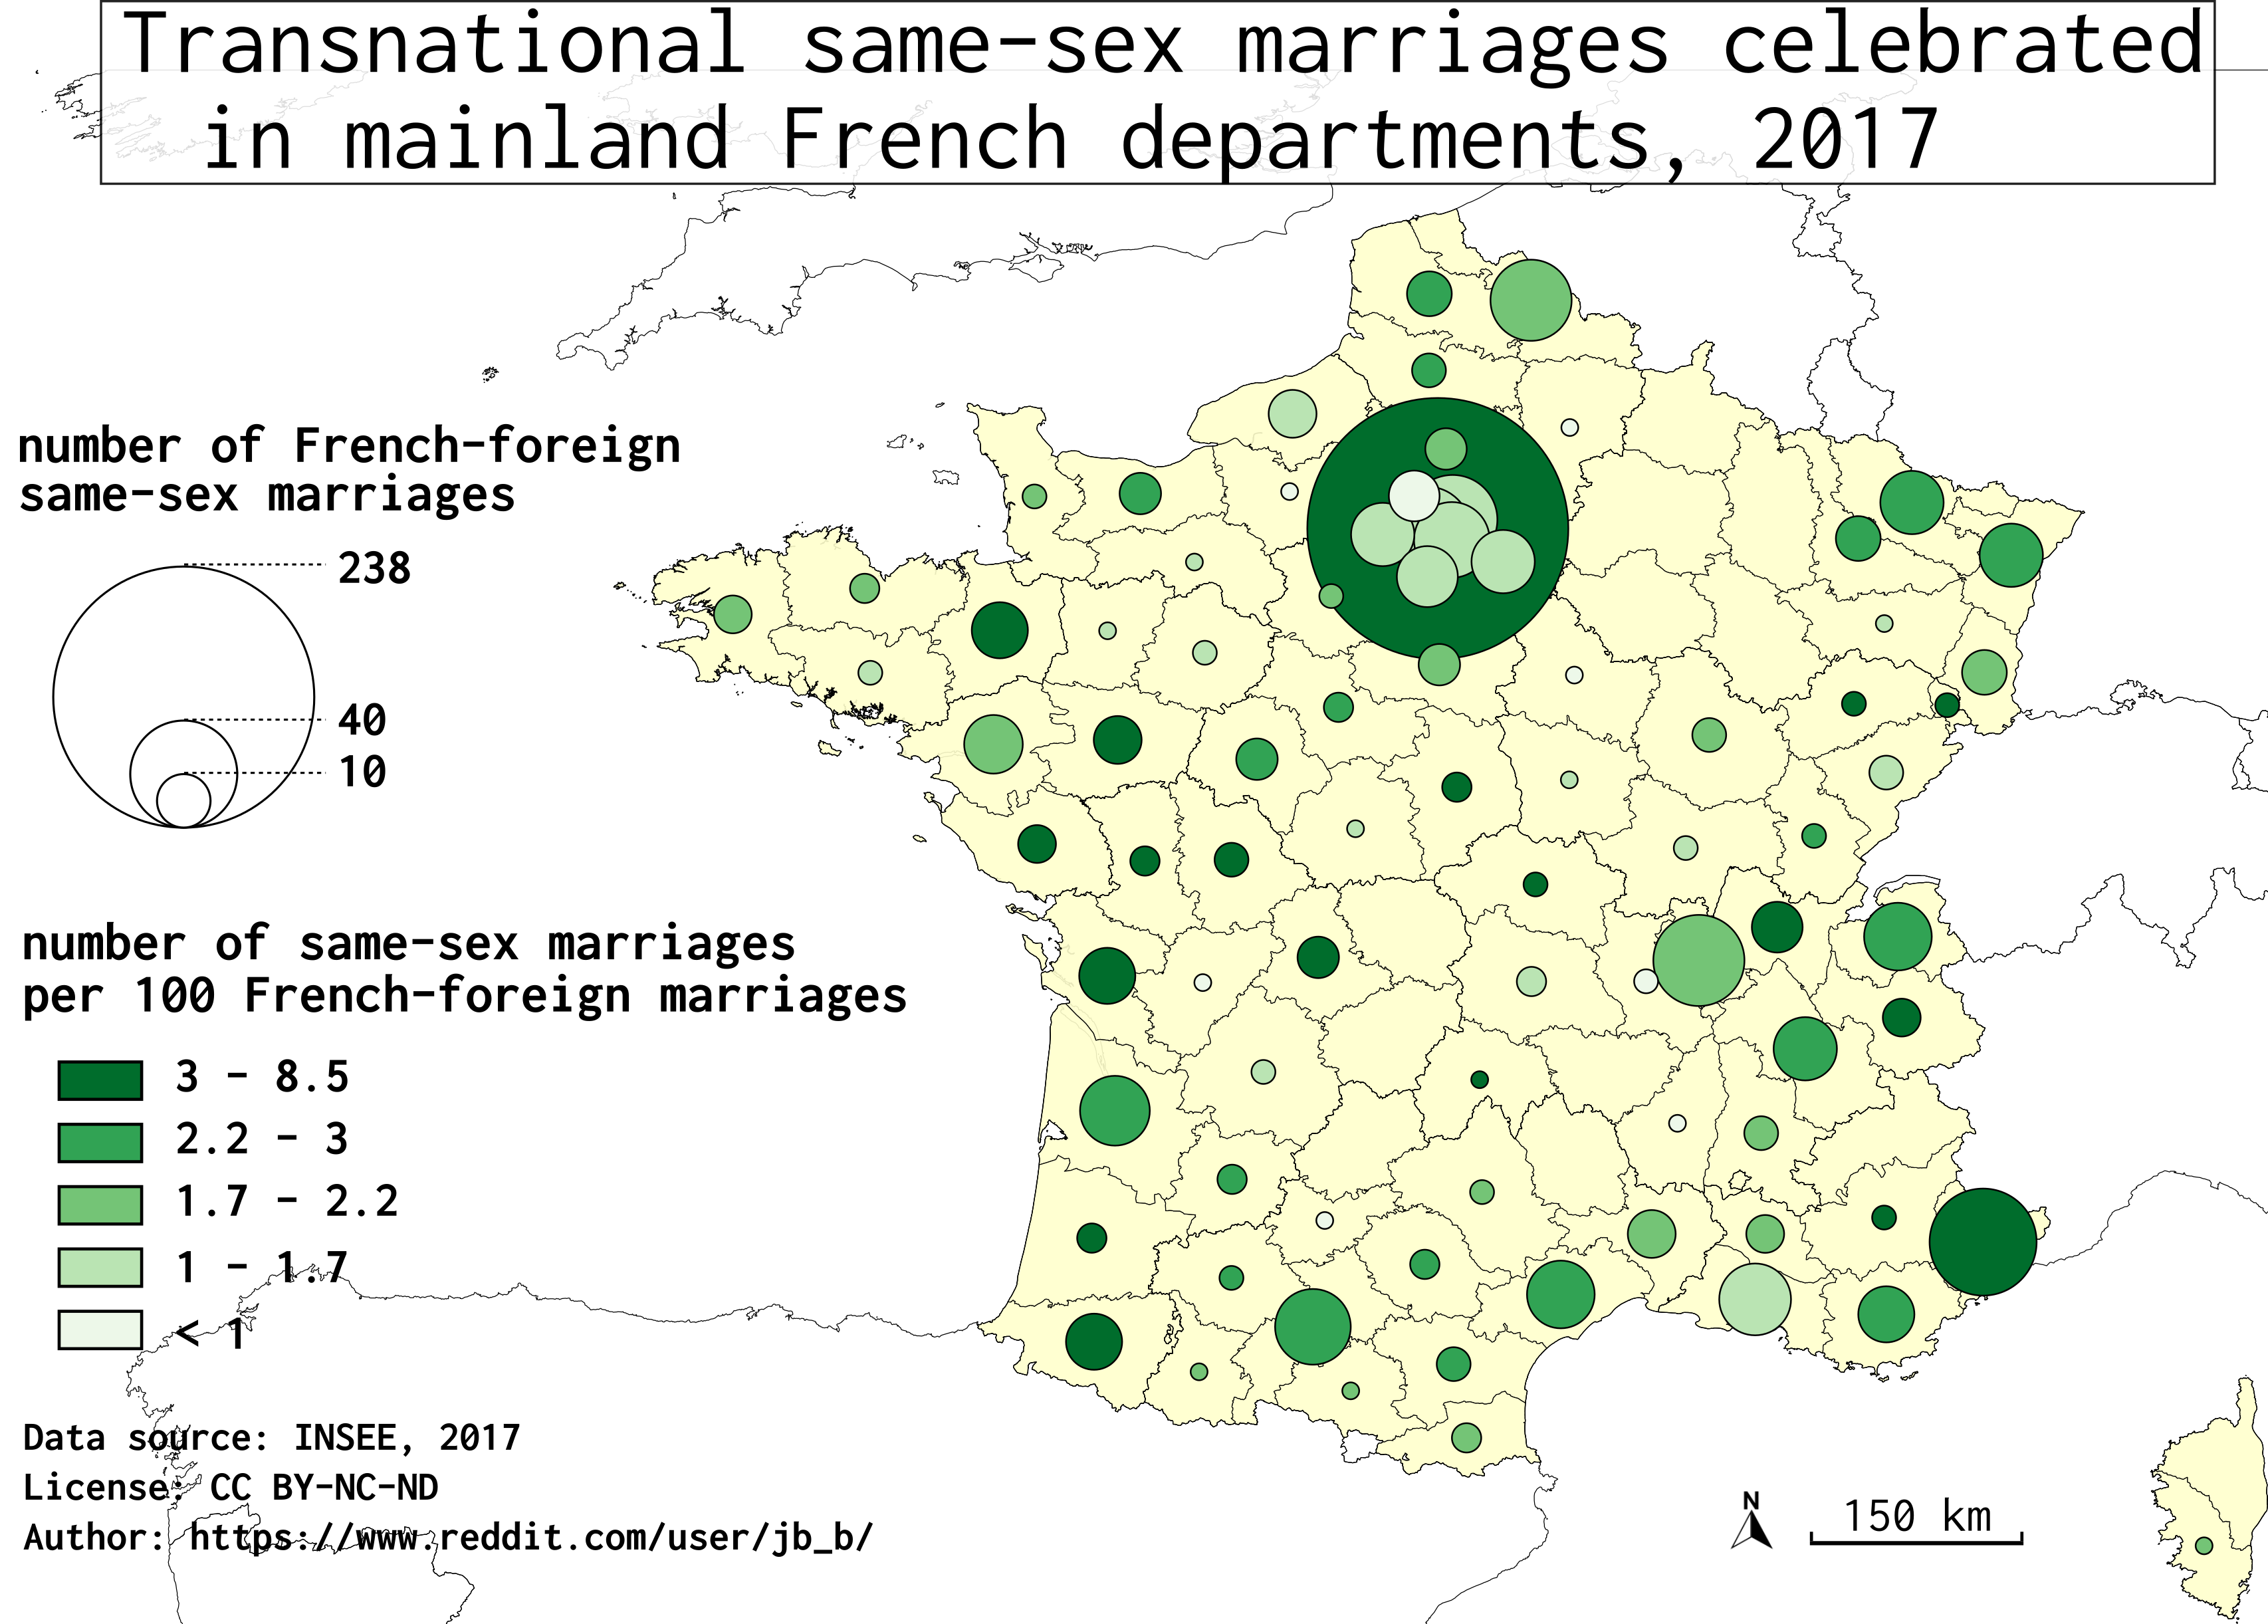 Map Map Of Transnational Same Sex Marriages In France In 2017 